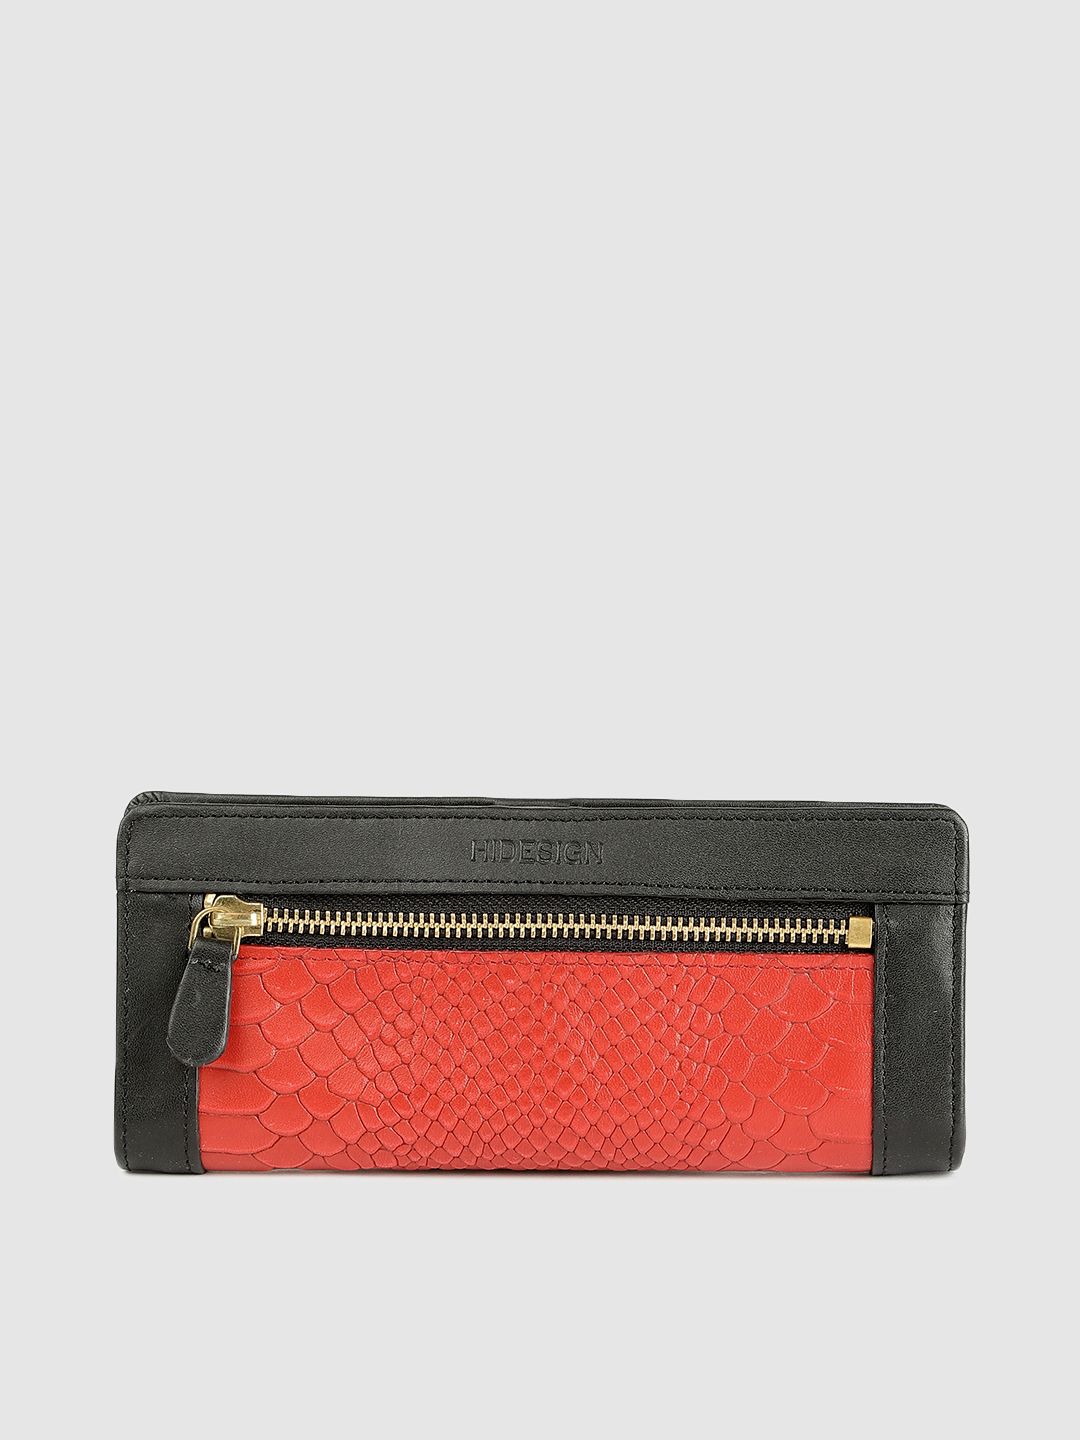 Hidesign Women Red & Black Textured Leather Two Fold Wallet Price in India